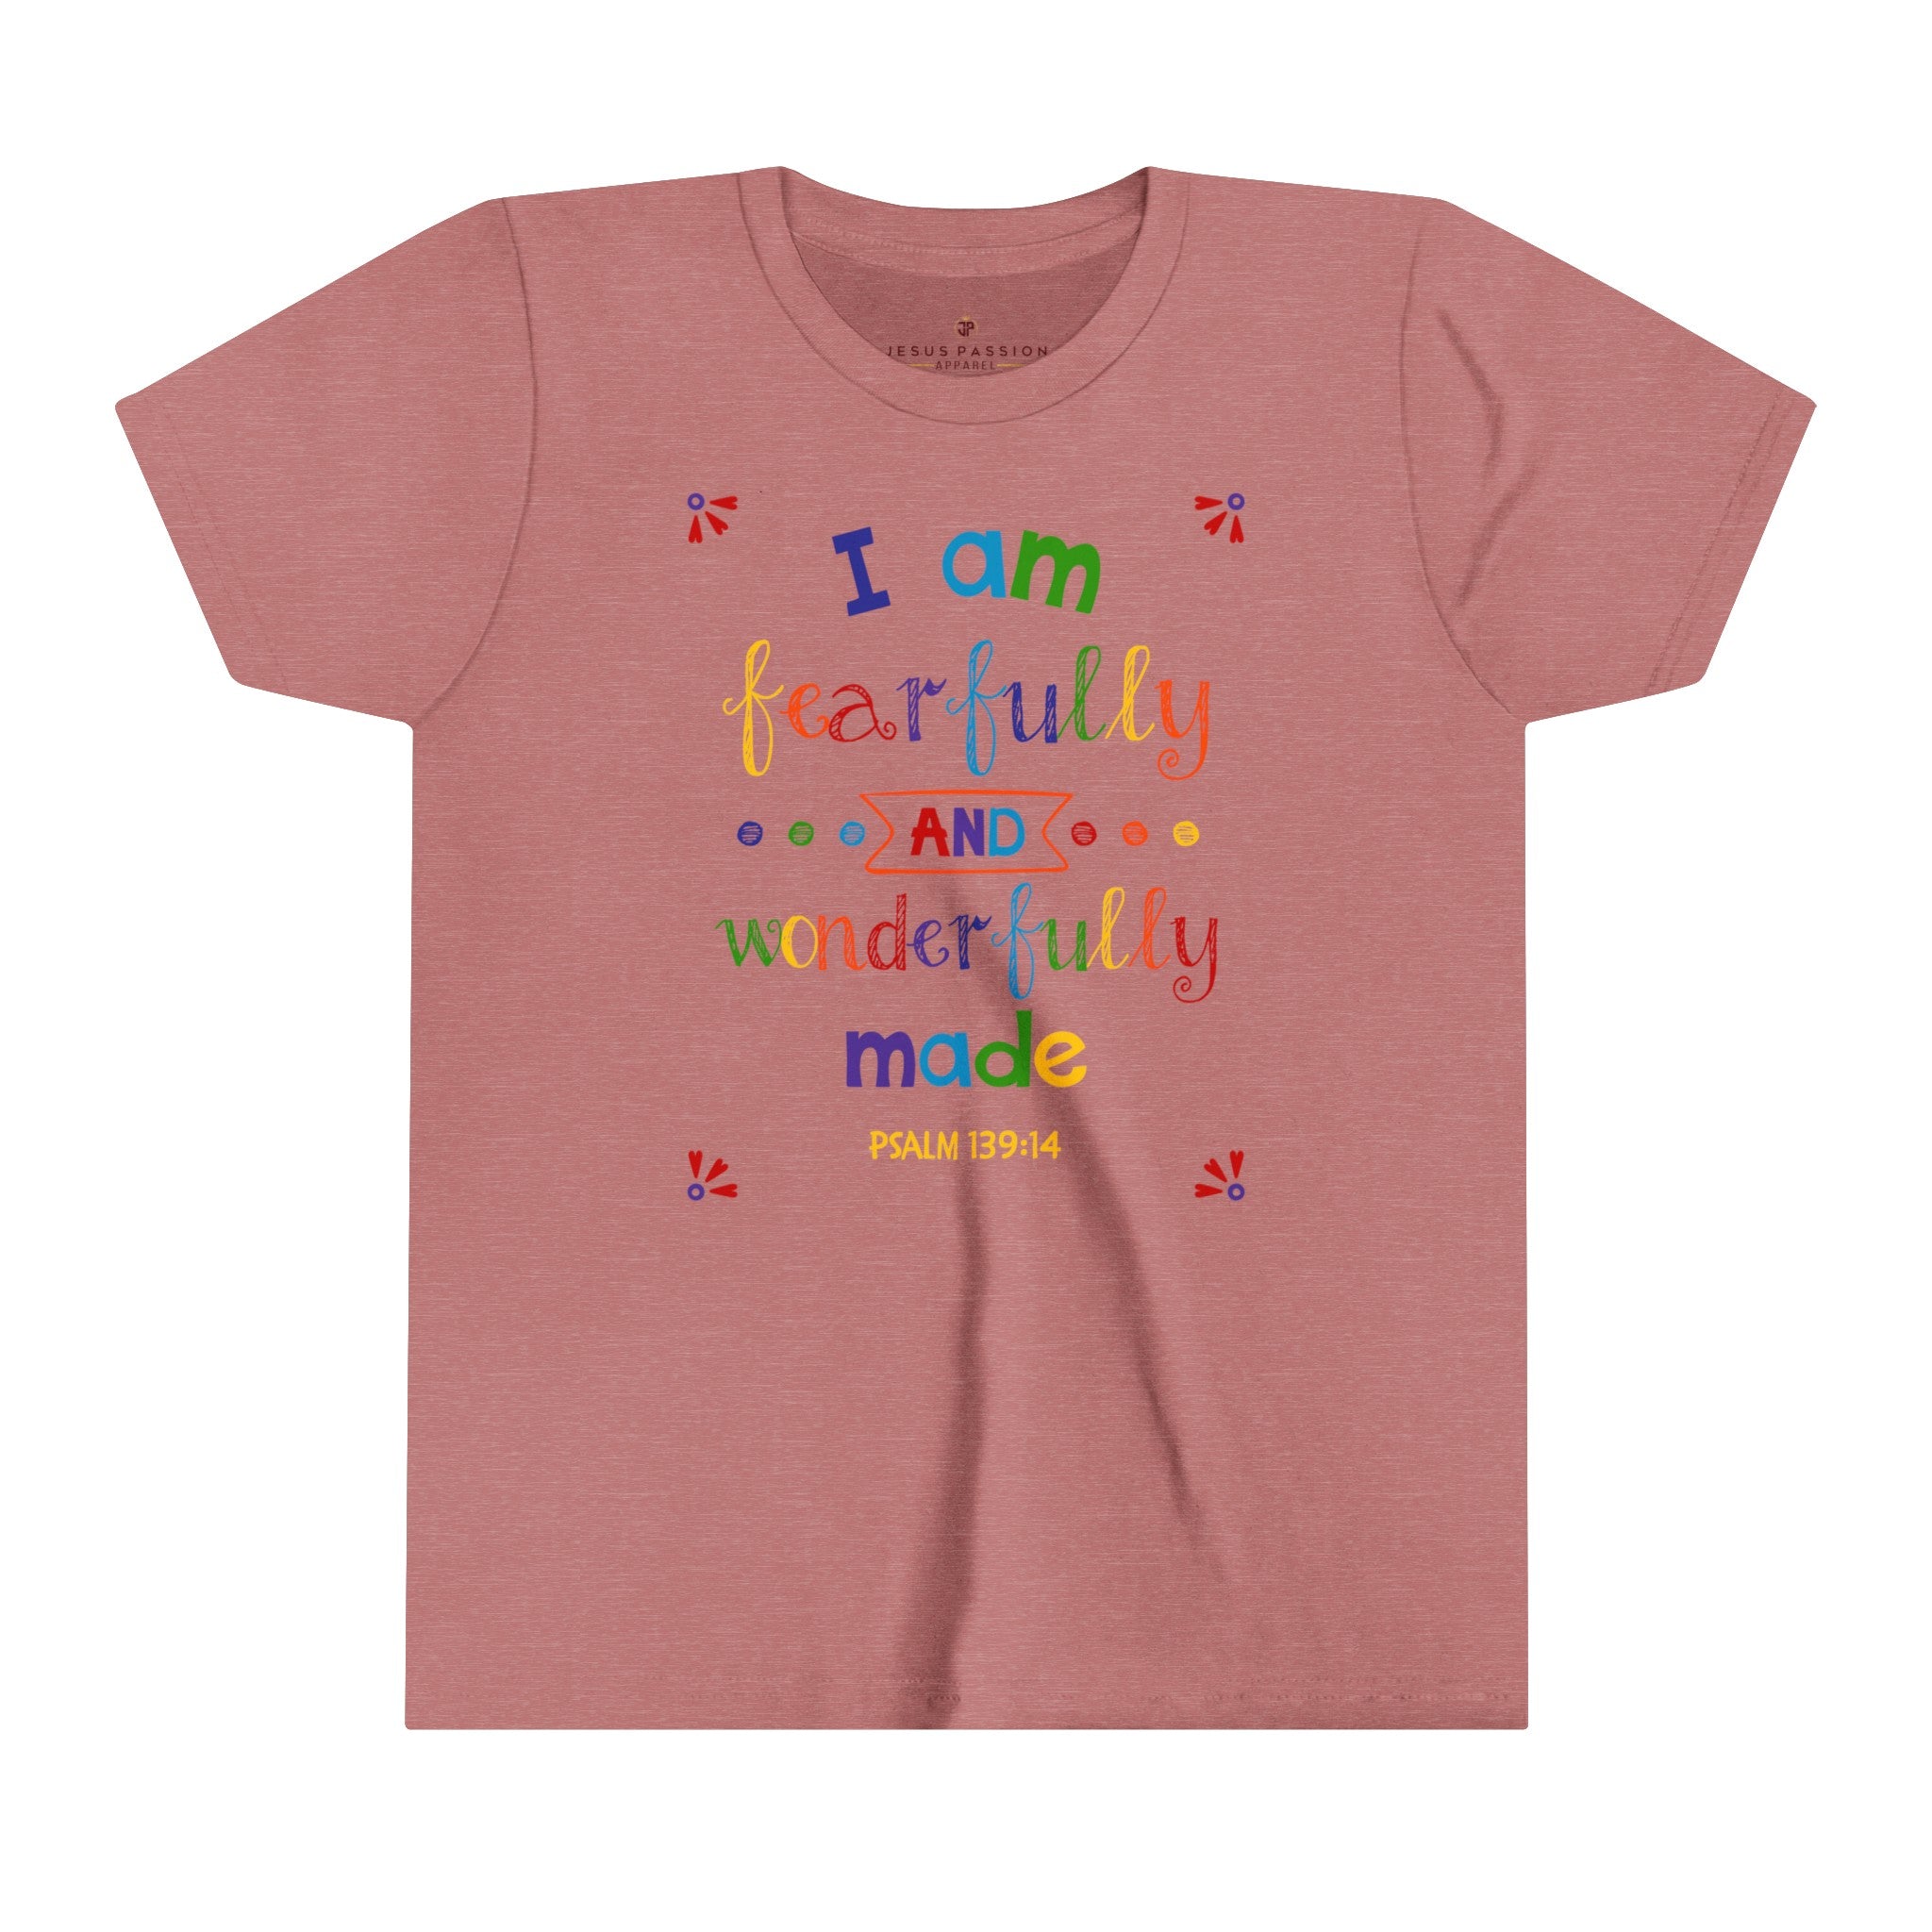 I am Fearfully Wonderfully Youth Relaxed-Fit T-Shirt Color: Heather Mauve Size: S Jesus Passion Apparel